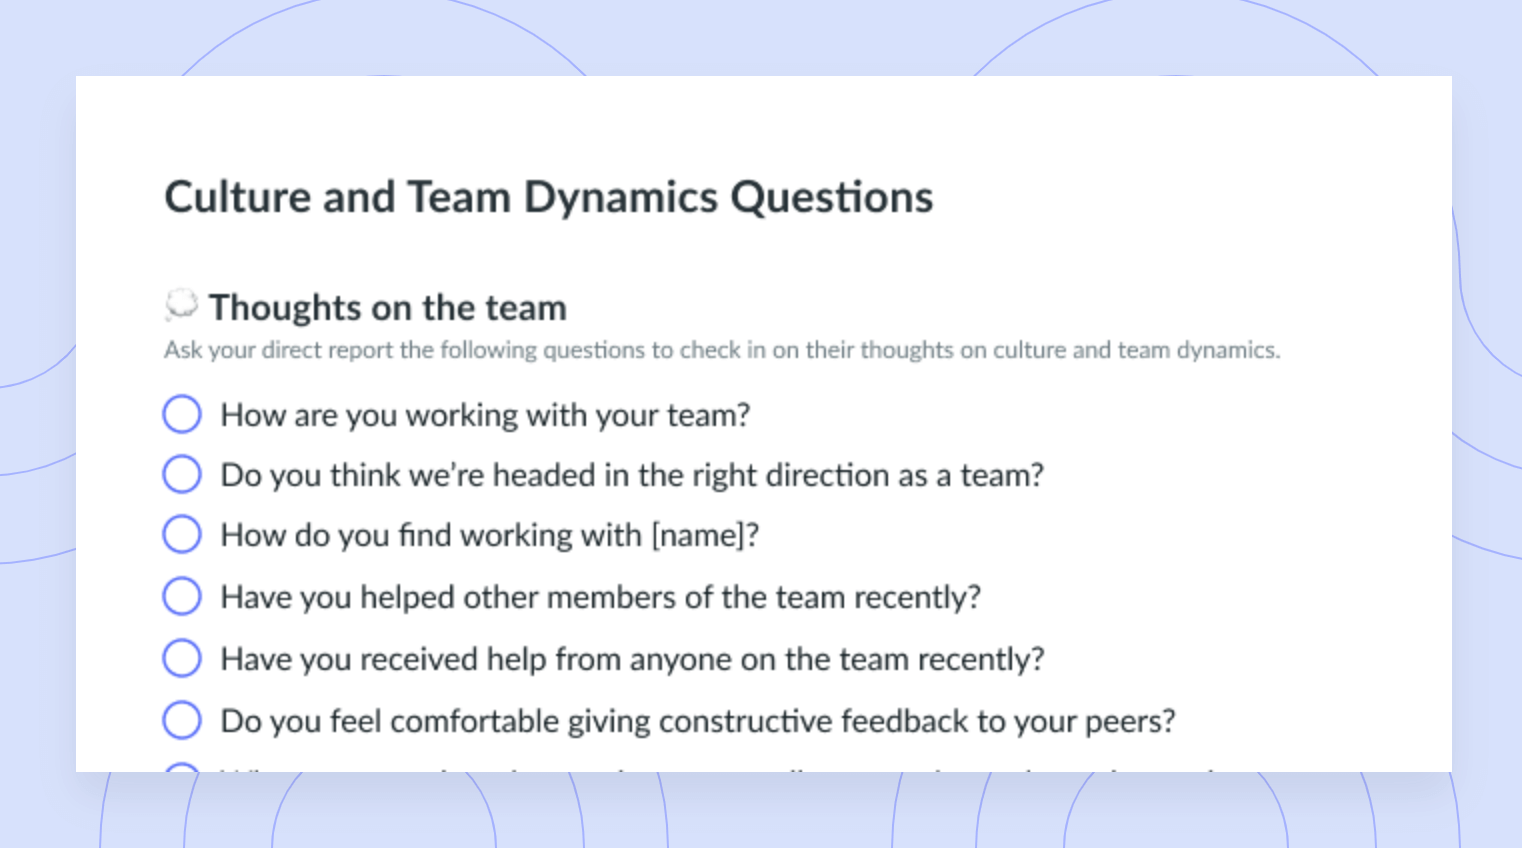 Culture and Team Dynamics Questions for 1-on-1s Template